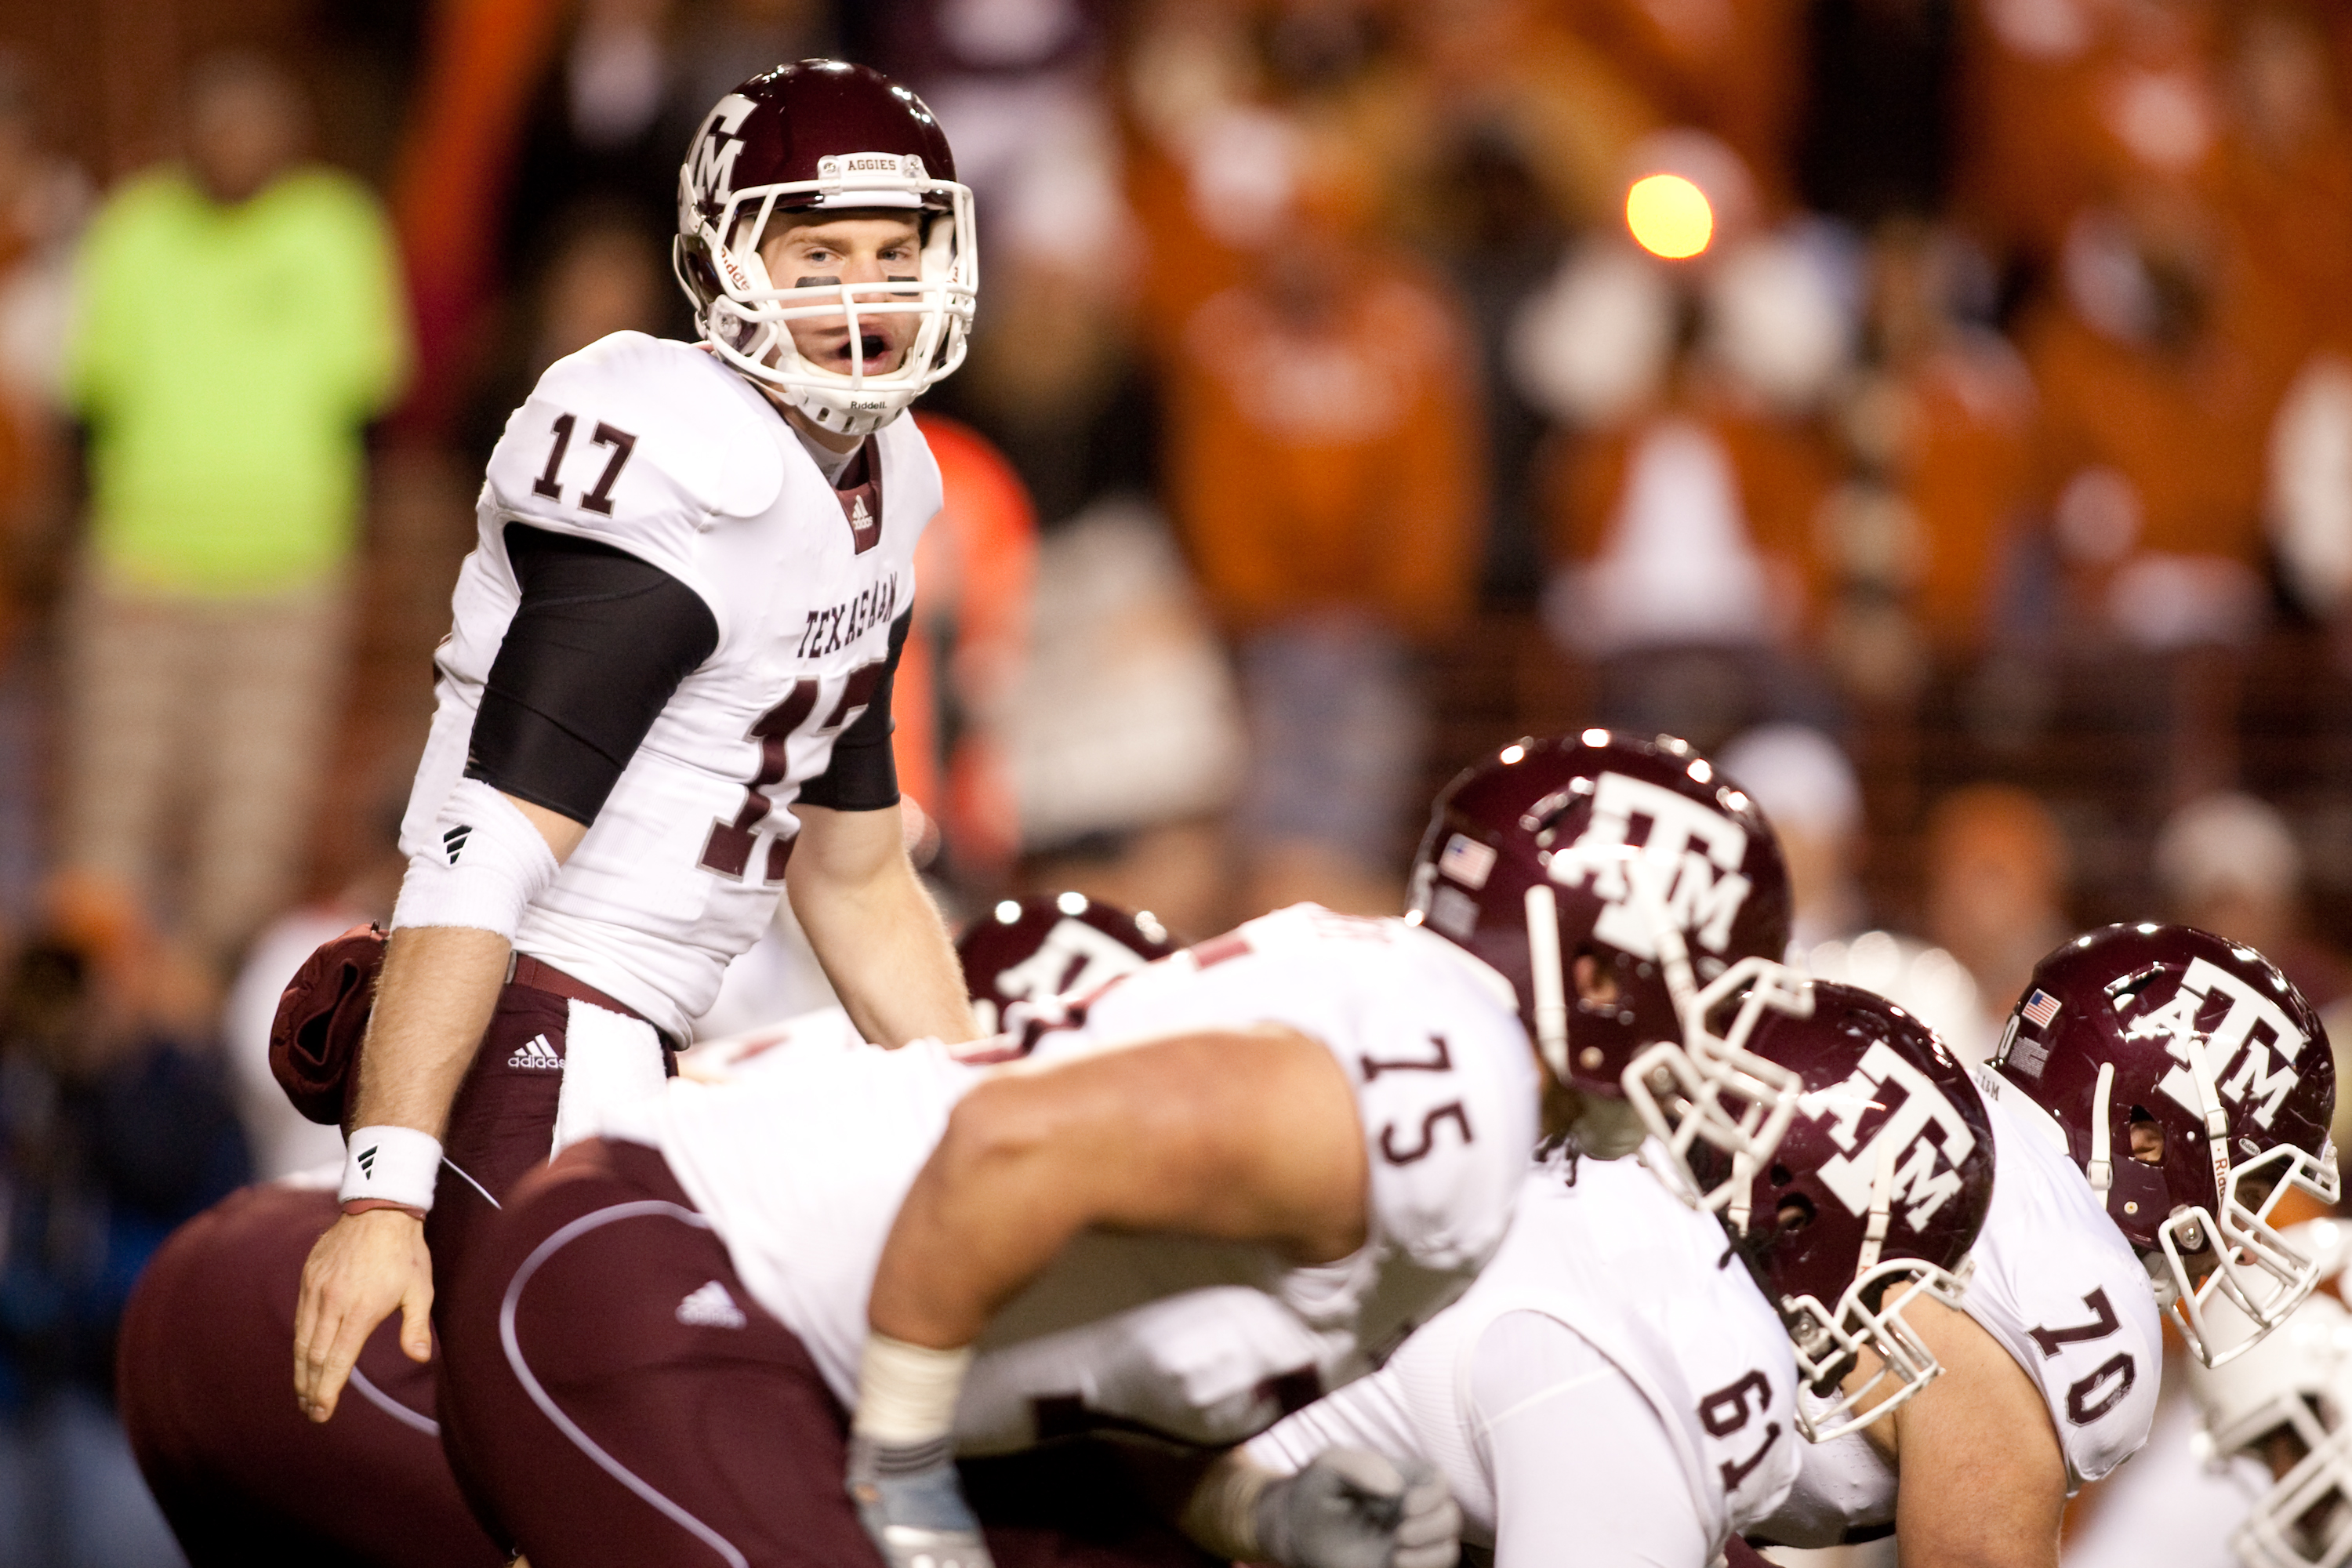 AUSTIN, TX - NOVEMBER 25:  Quarterback Ryan Tannehill #17 of Texas A&M during the game against University of Texas in the first half at Darrell K. Royal-Texas Memorial Stadium on November 25, 2010 in Austin, Texas. (Photo by Darren Carroll/Getty Images)